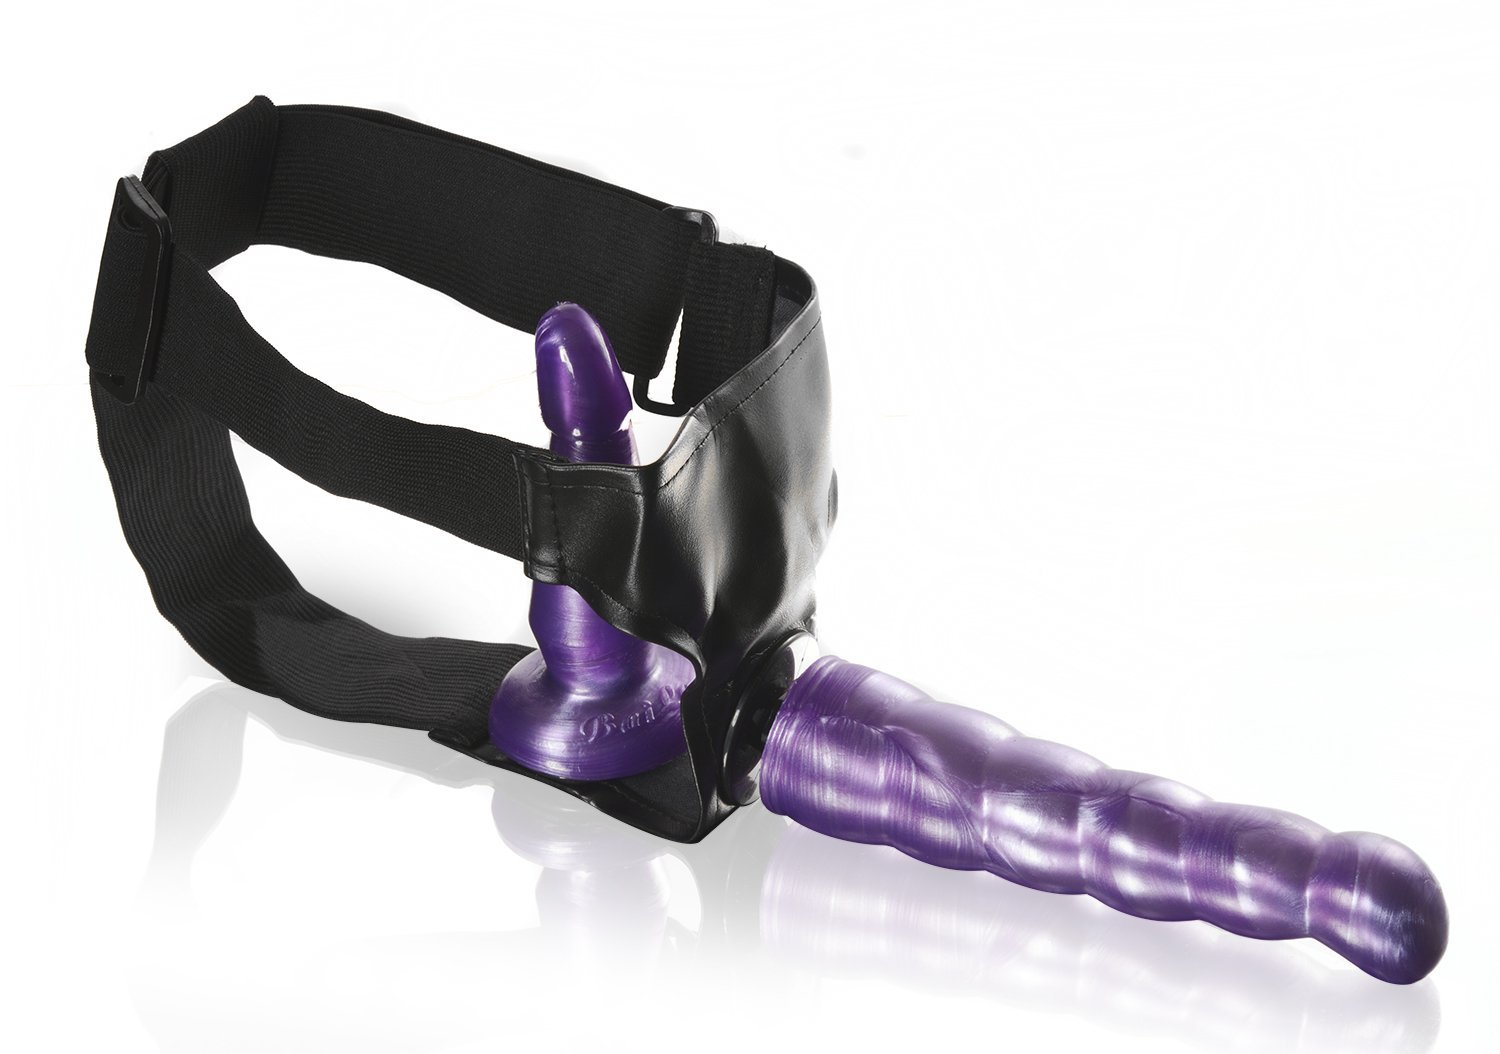 Product Deluxe Strap On Doppel Dildo